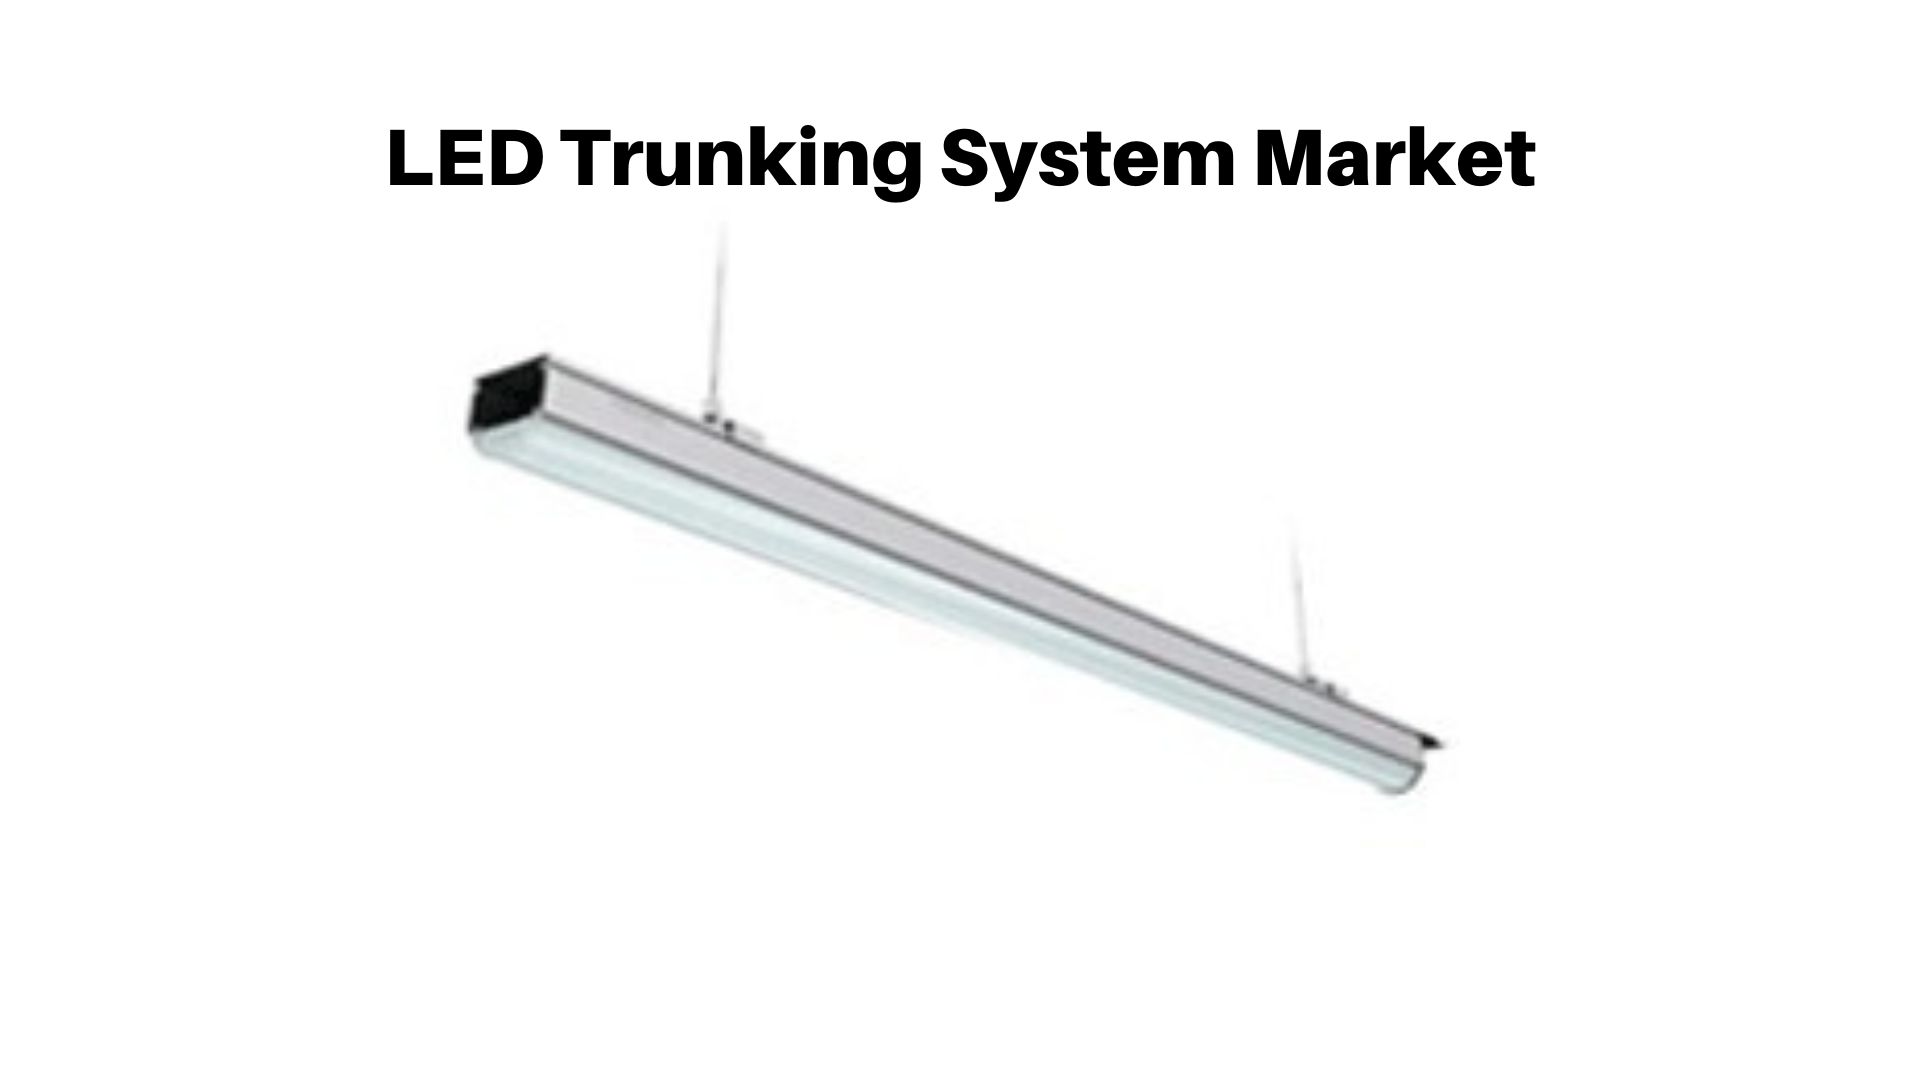 LED Trunking Systems Market Size Expected To Reach USD 6.24 Billion By 2033